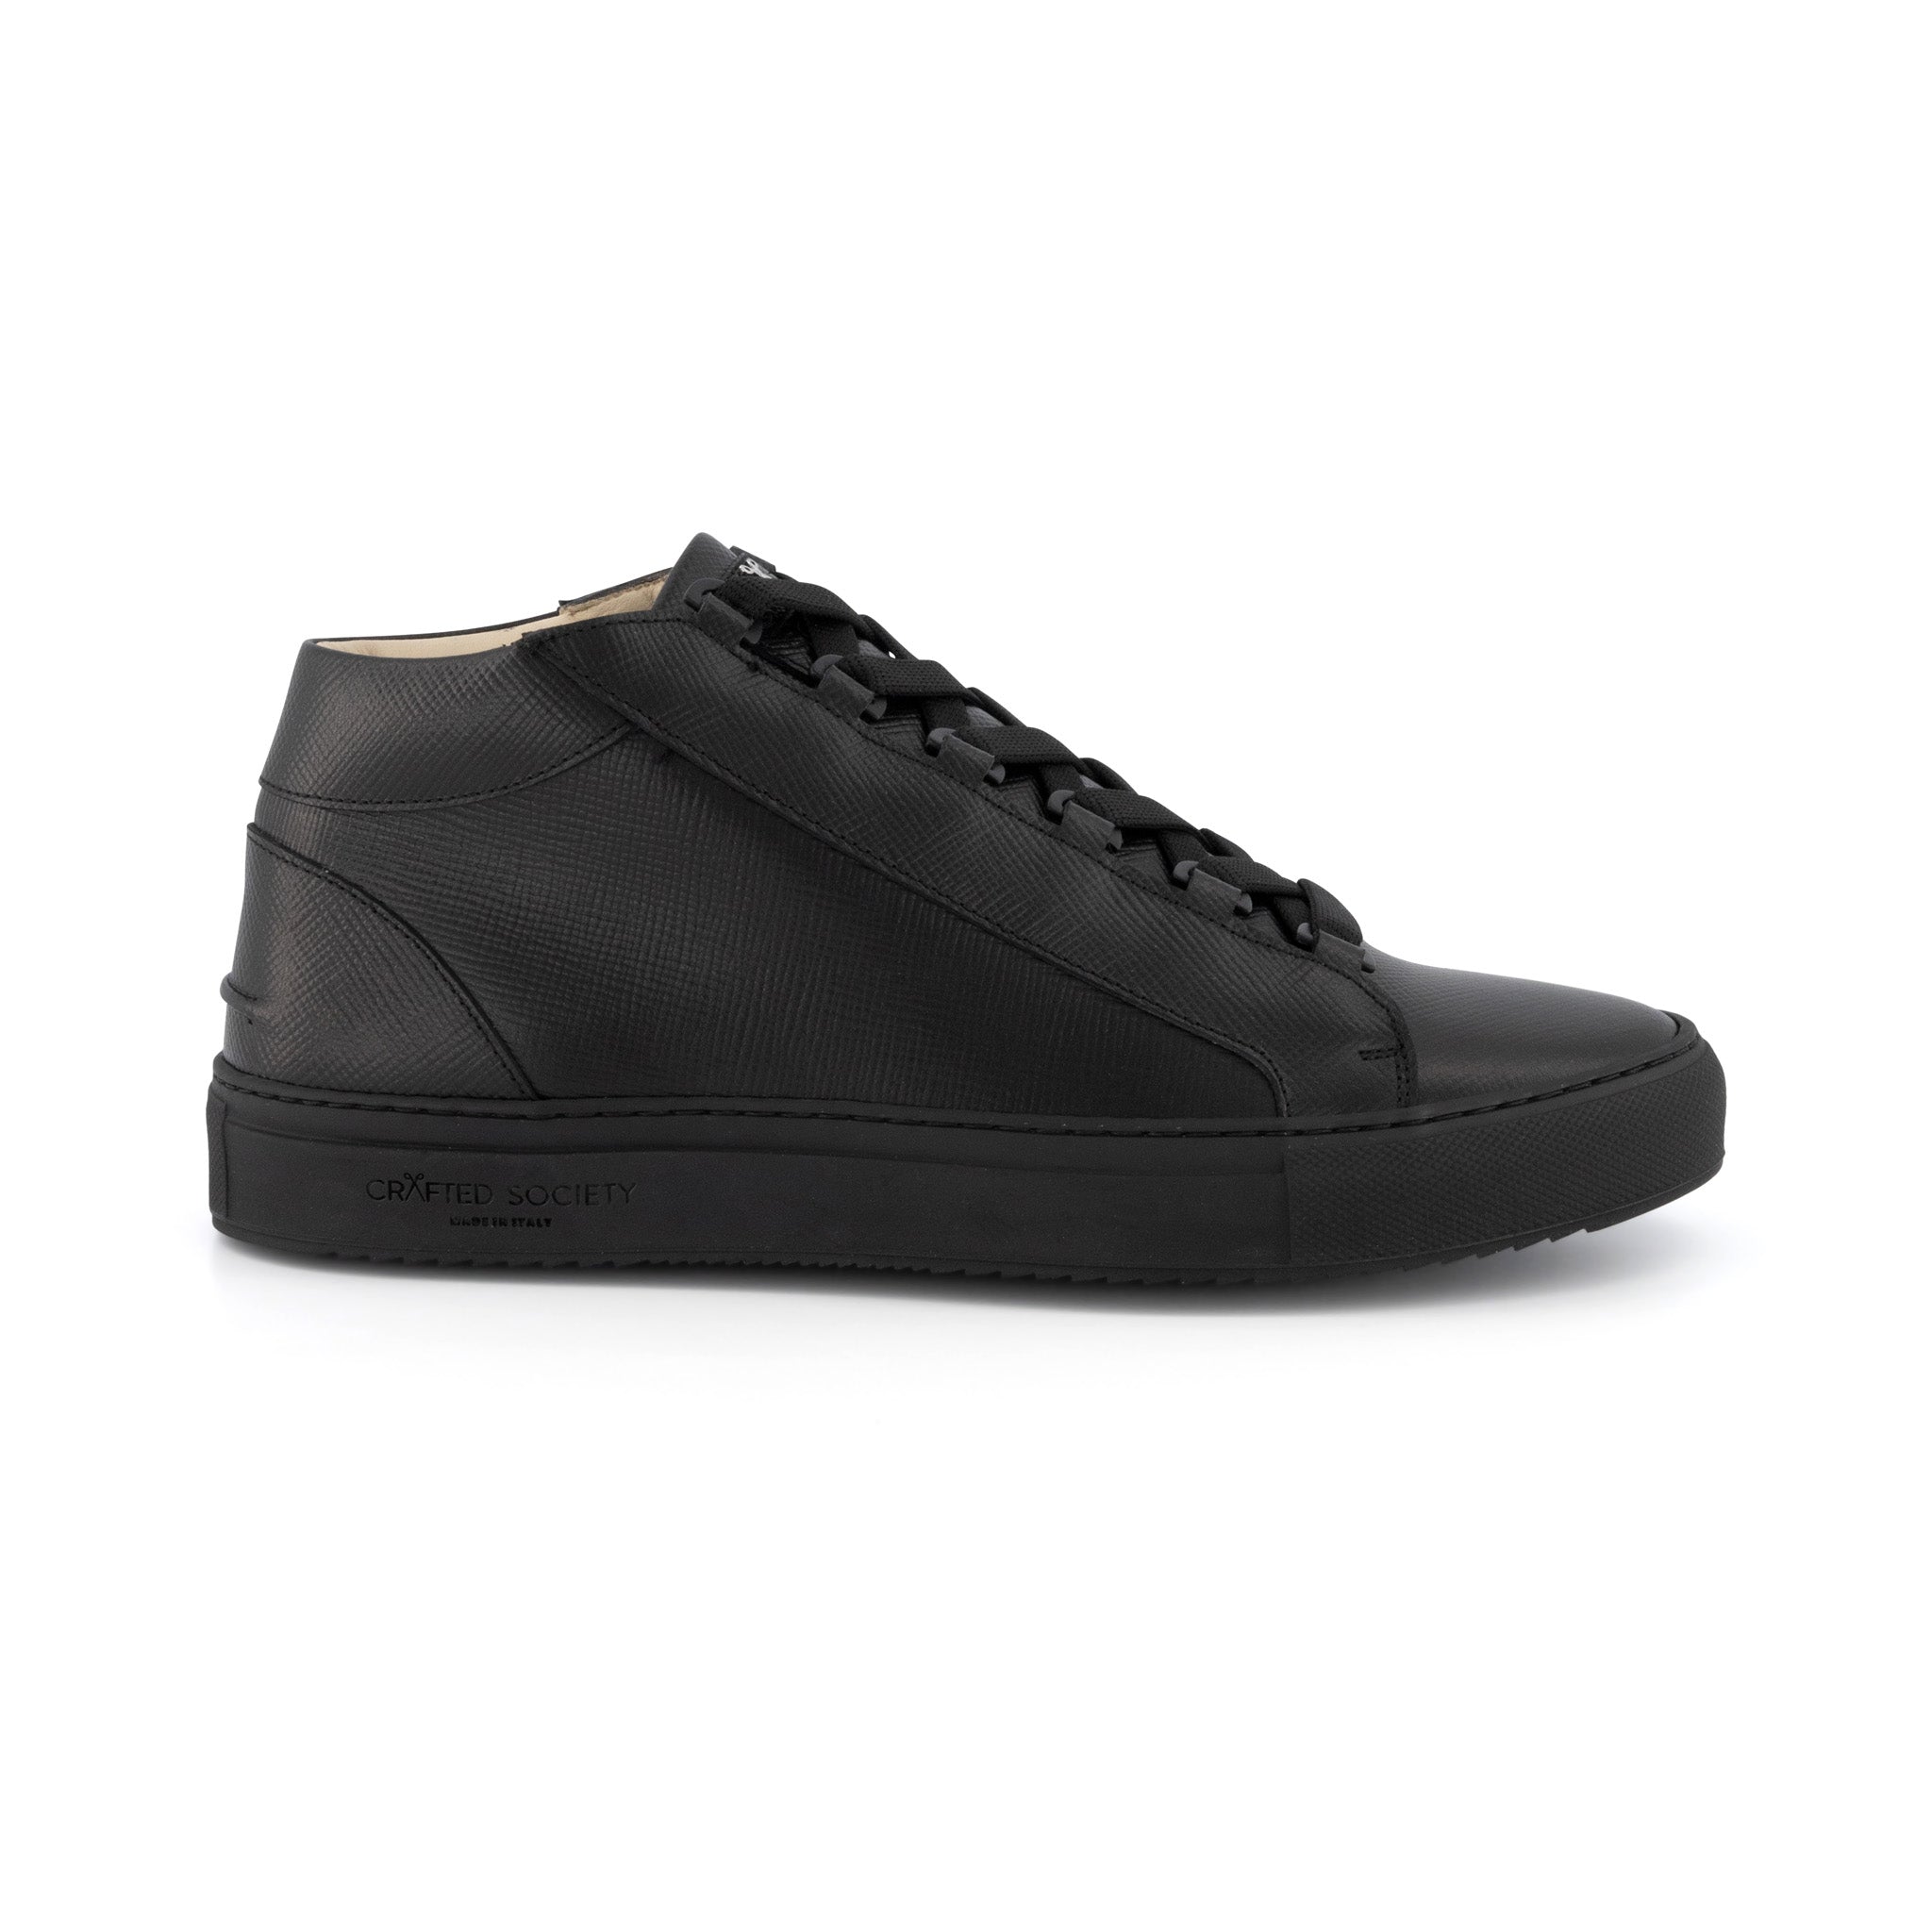 Rico Mid Sneaker | Black Saffiano Leather | Made in Italy | Sizes 37, 38 & 46